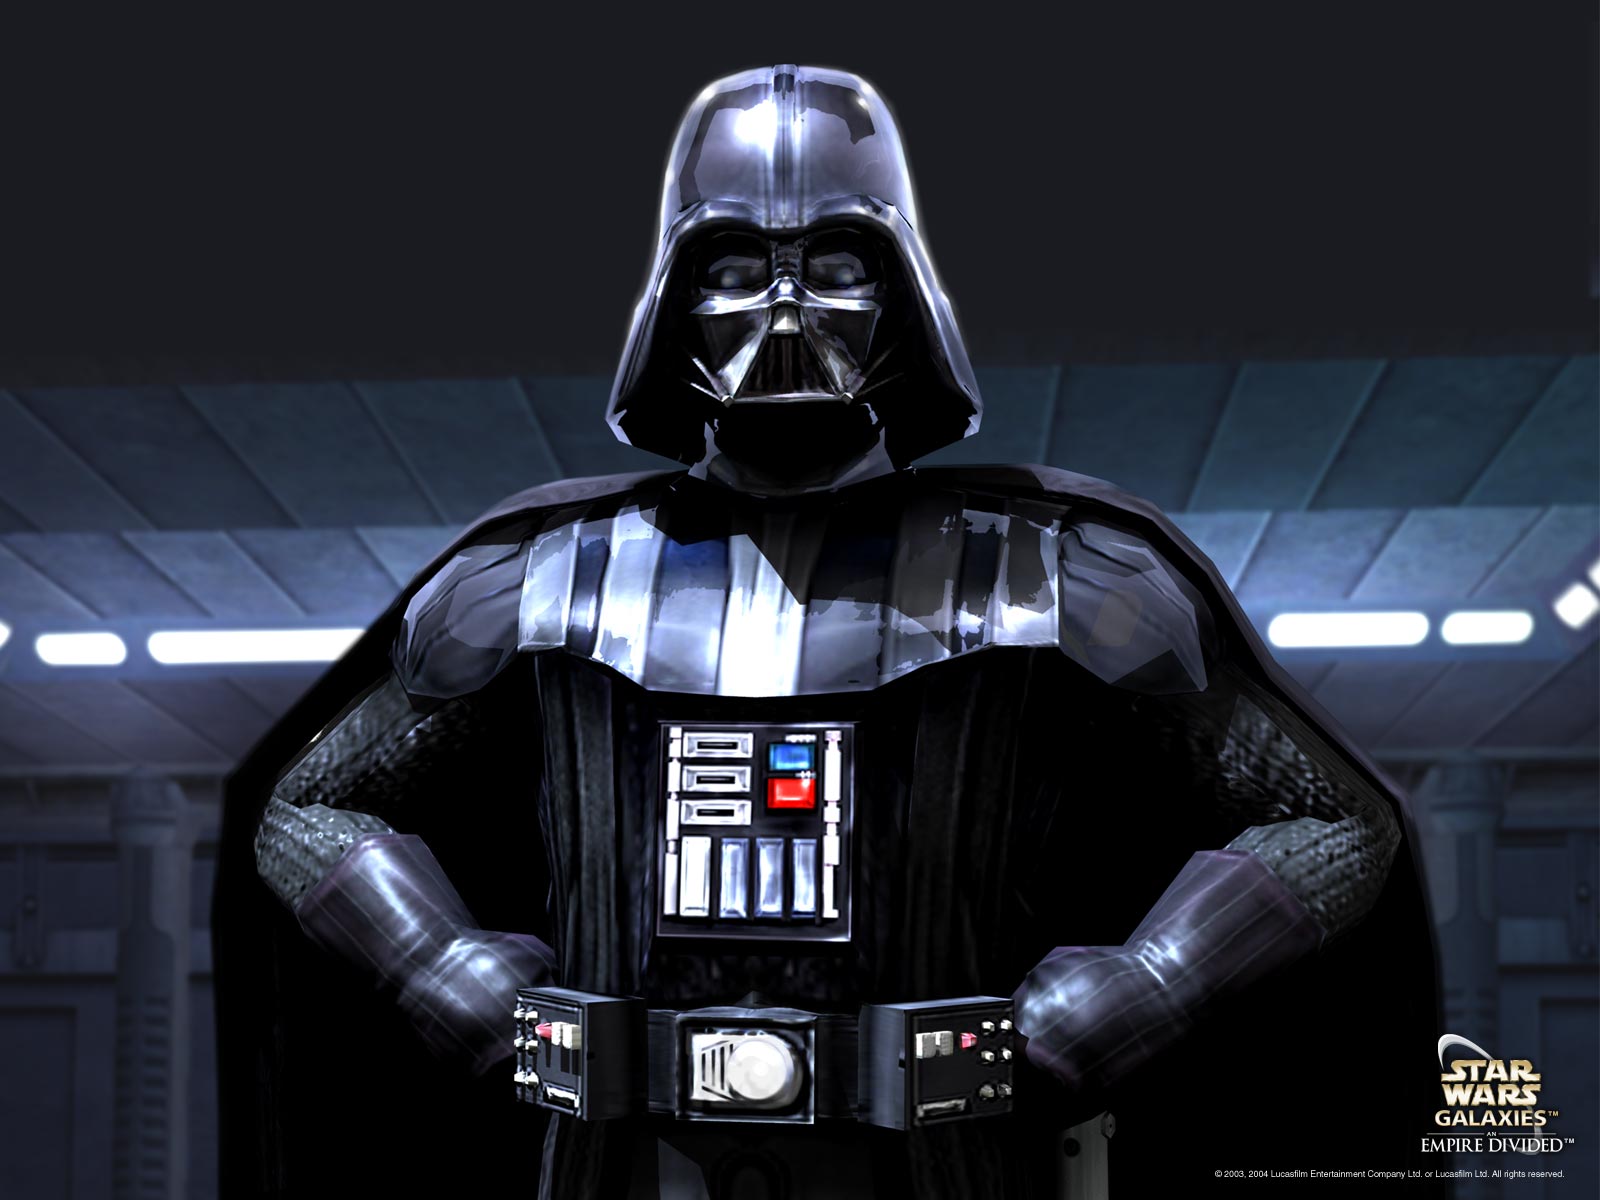 Darth Vader standing in the darkness with a glowing red lightsaber.